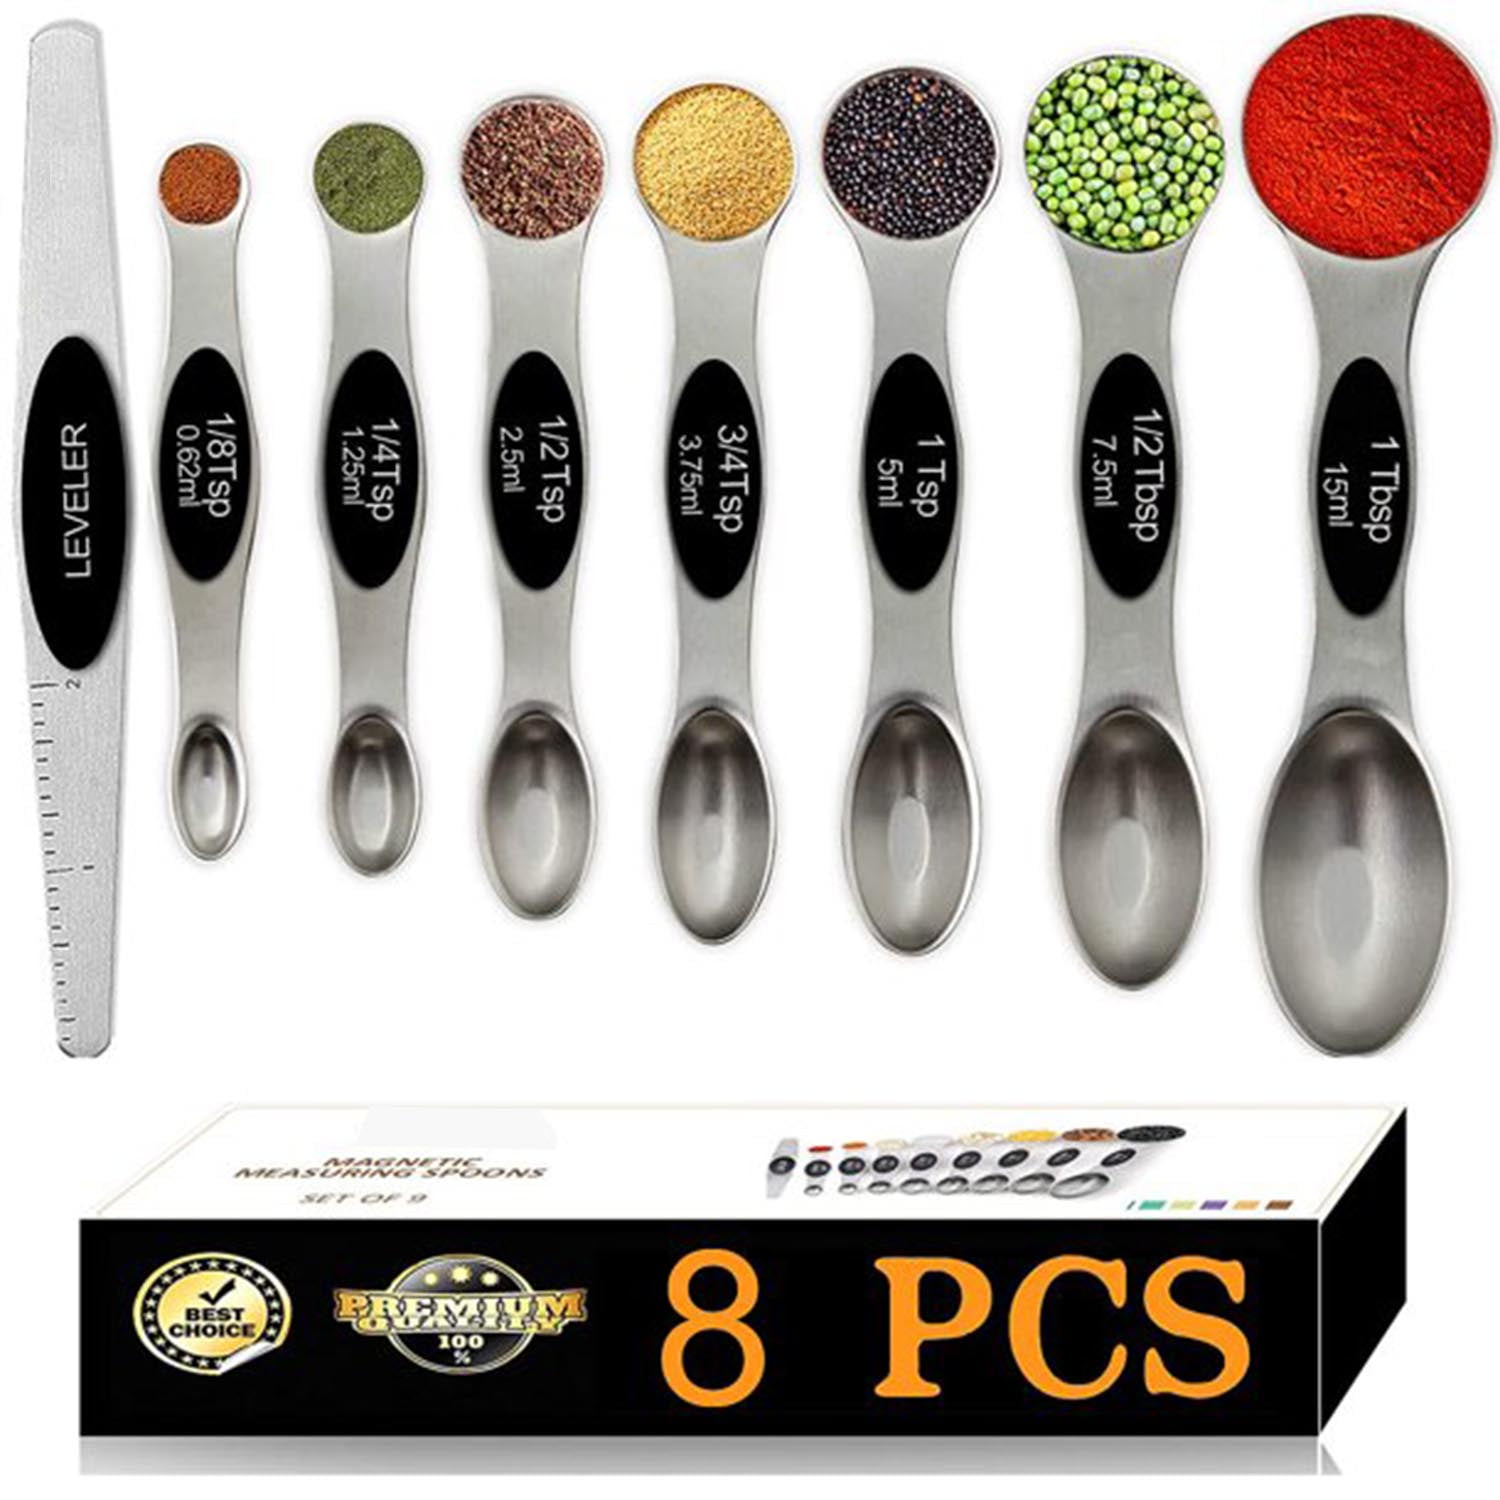 Amco Advanced Performance Measuring Spoons, Set of 4